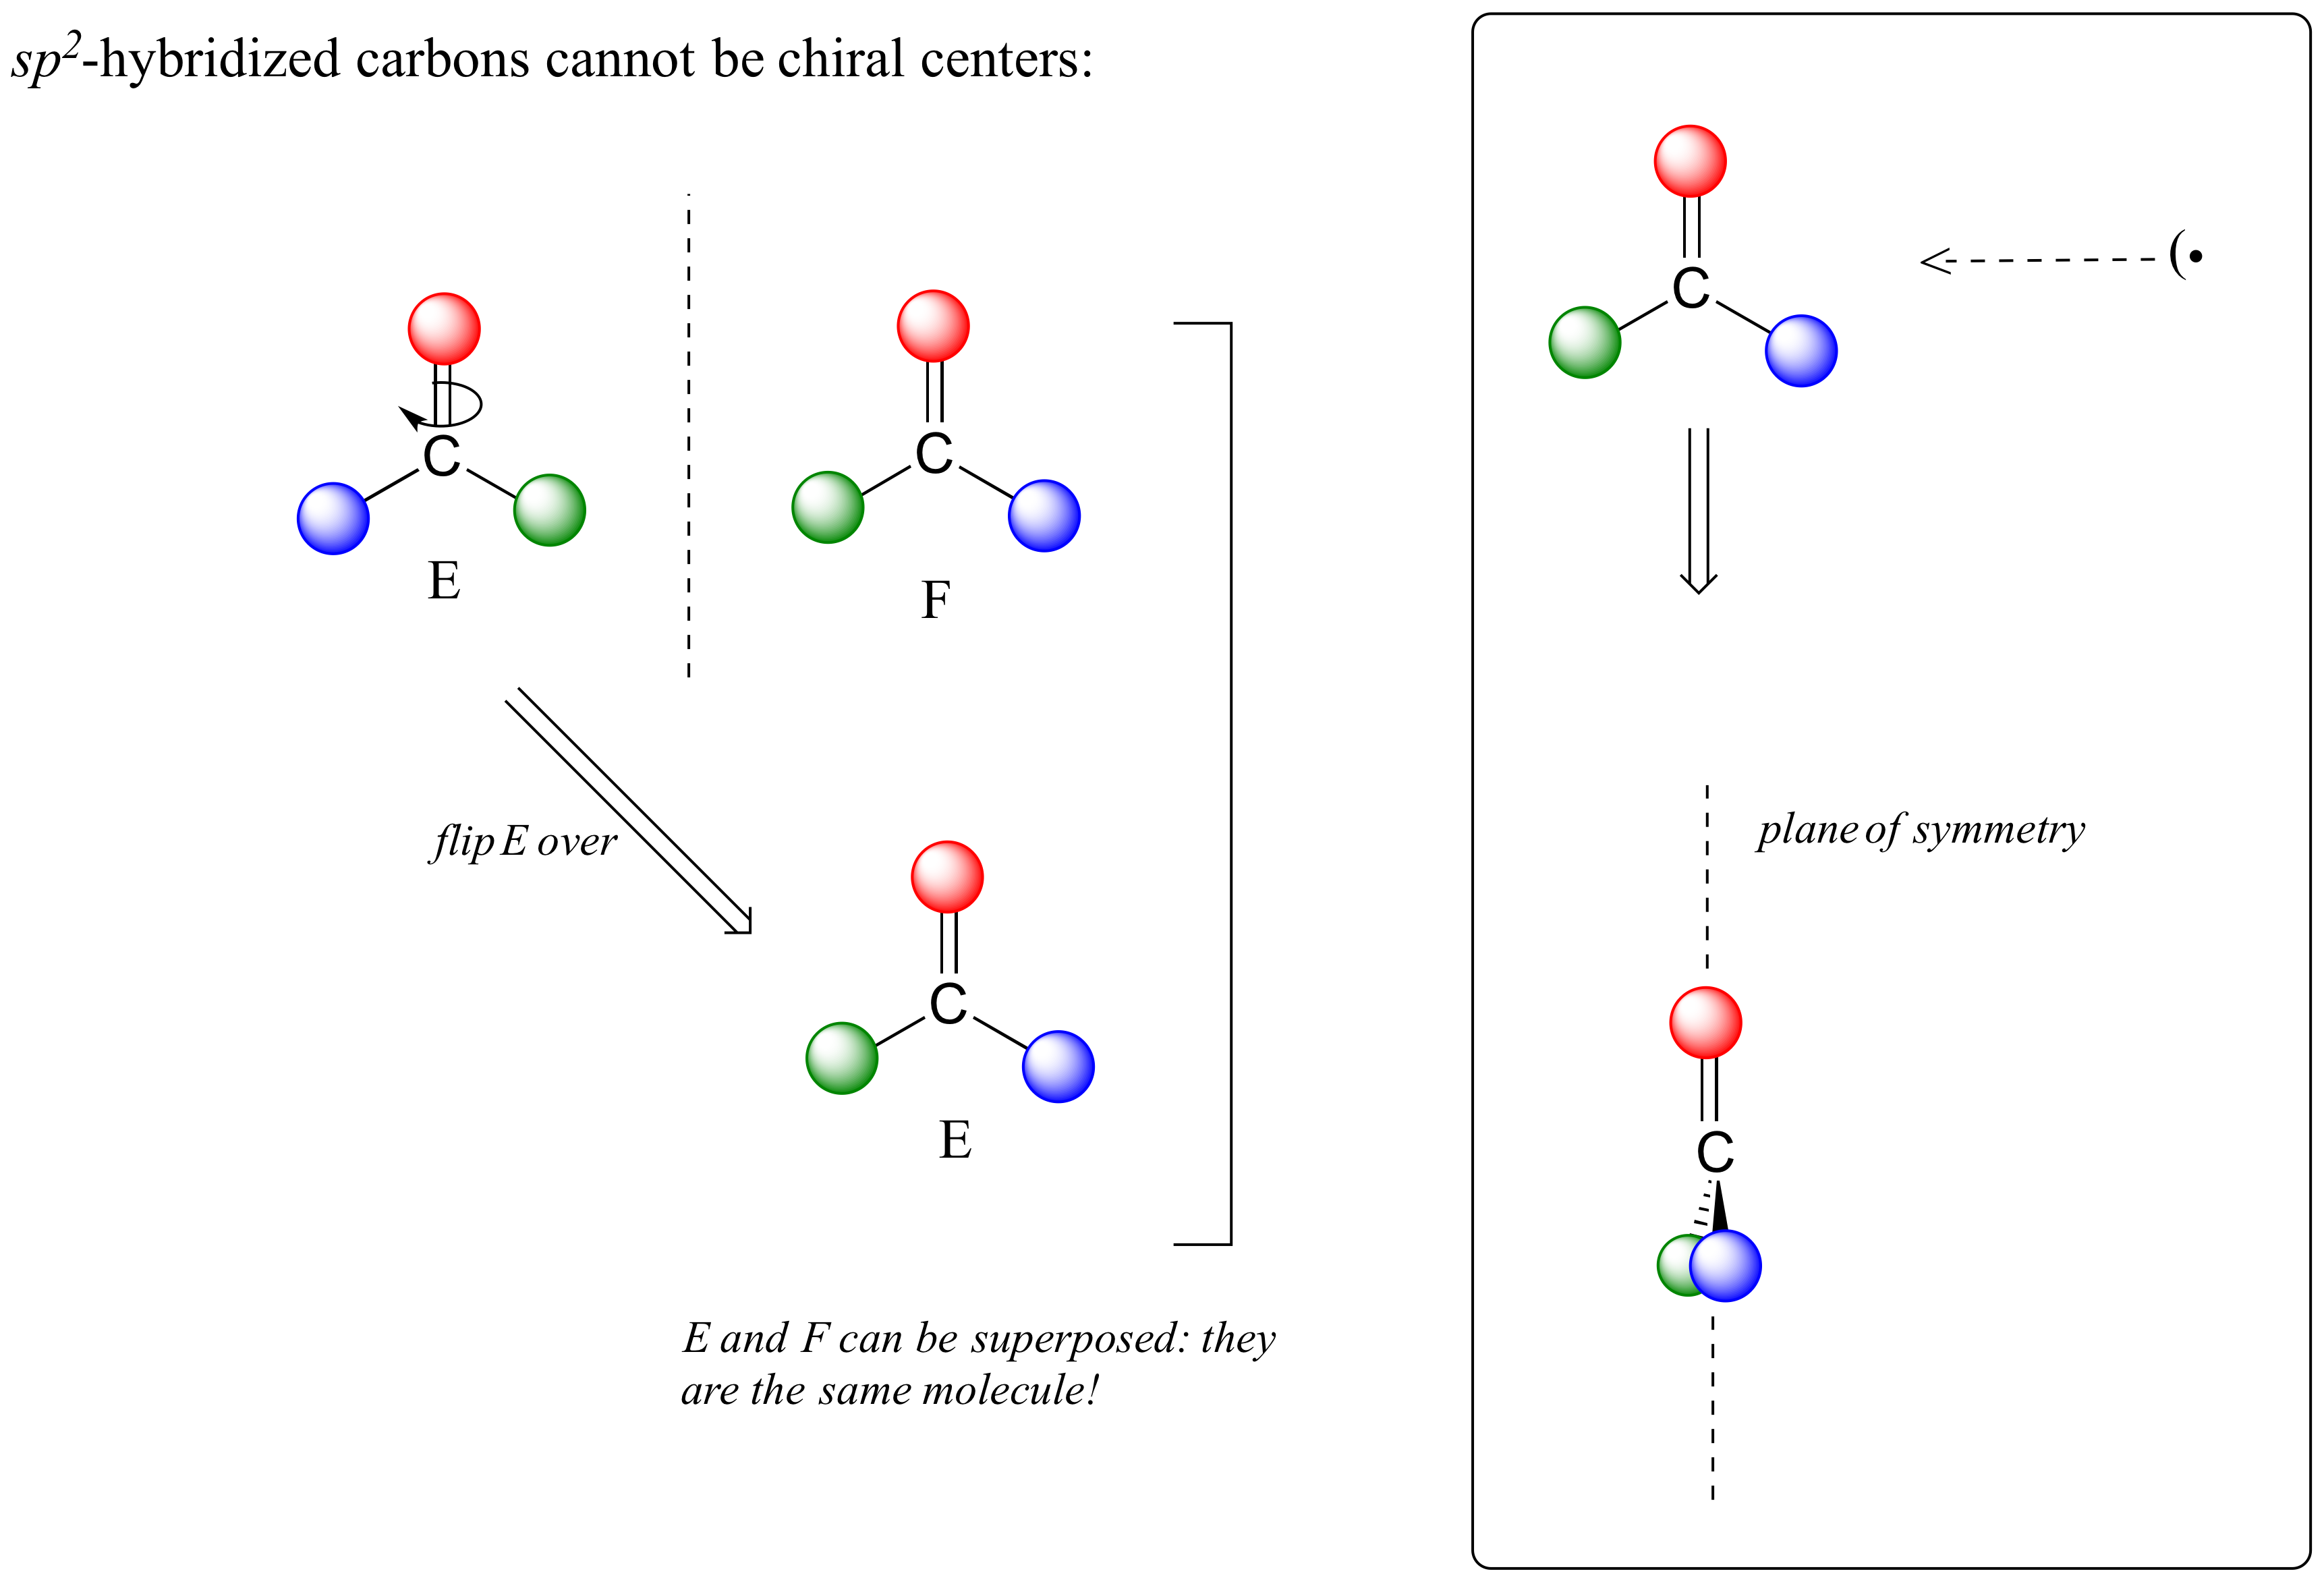 Structures E and F show carbon bonded to 3 balls: red, blue and green. The geometry is trigonal planar, with all balls in the plane of the paper. Structure E has the blue ball to the left and green to the right, in its mirror image F the blue ball is to the right and green is to the left. When E is flipped the resulting structure is superimposable with F. E and F are the same molecule. An internal mirror plane can be identified that bisects all 4 atoms..